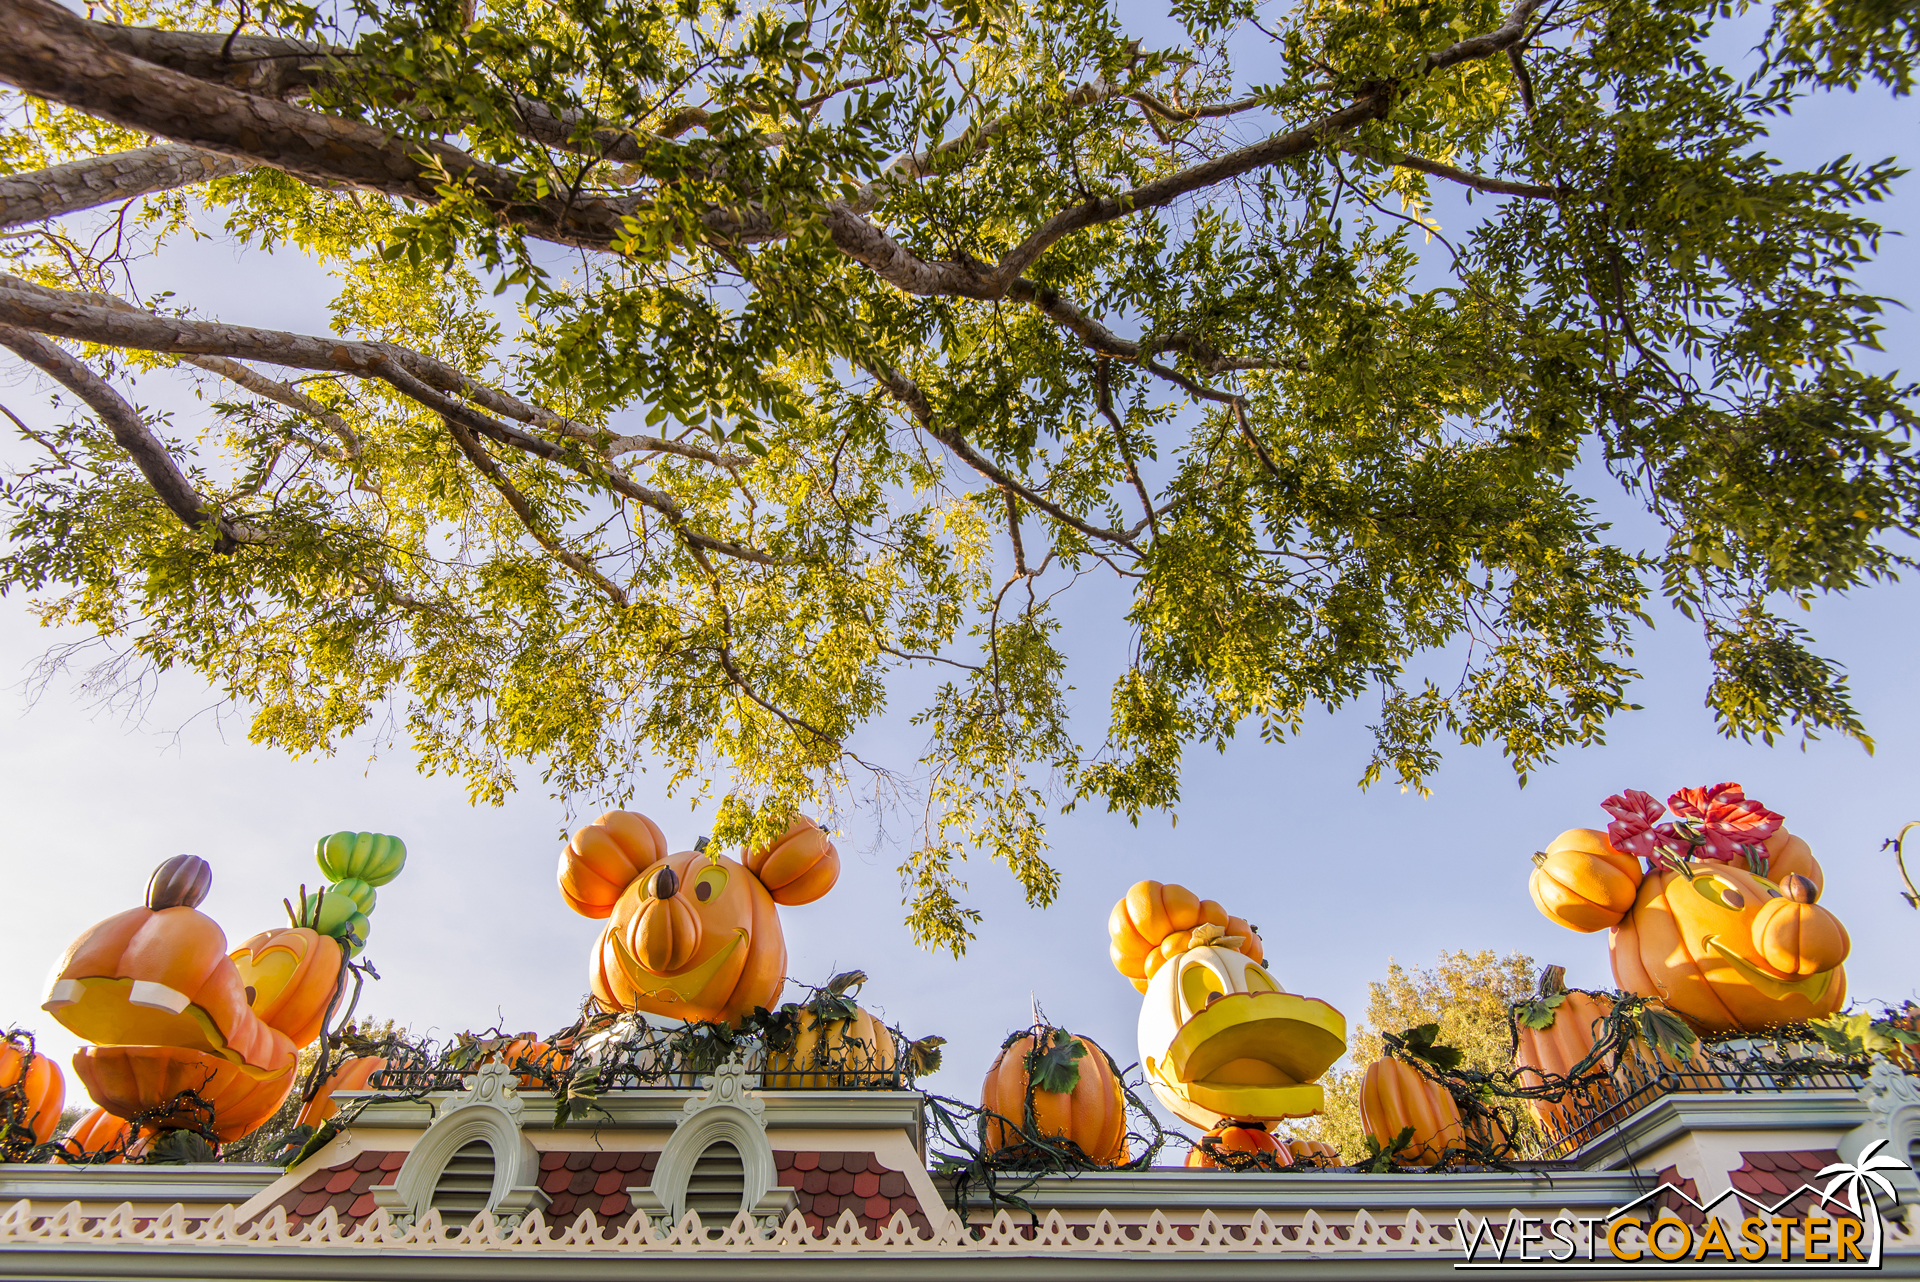  Those pumpkin Disney characters are back across the entrance gates of Disneyland Park. 